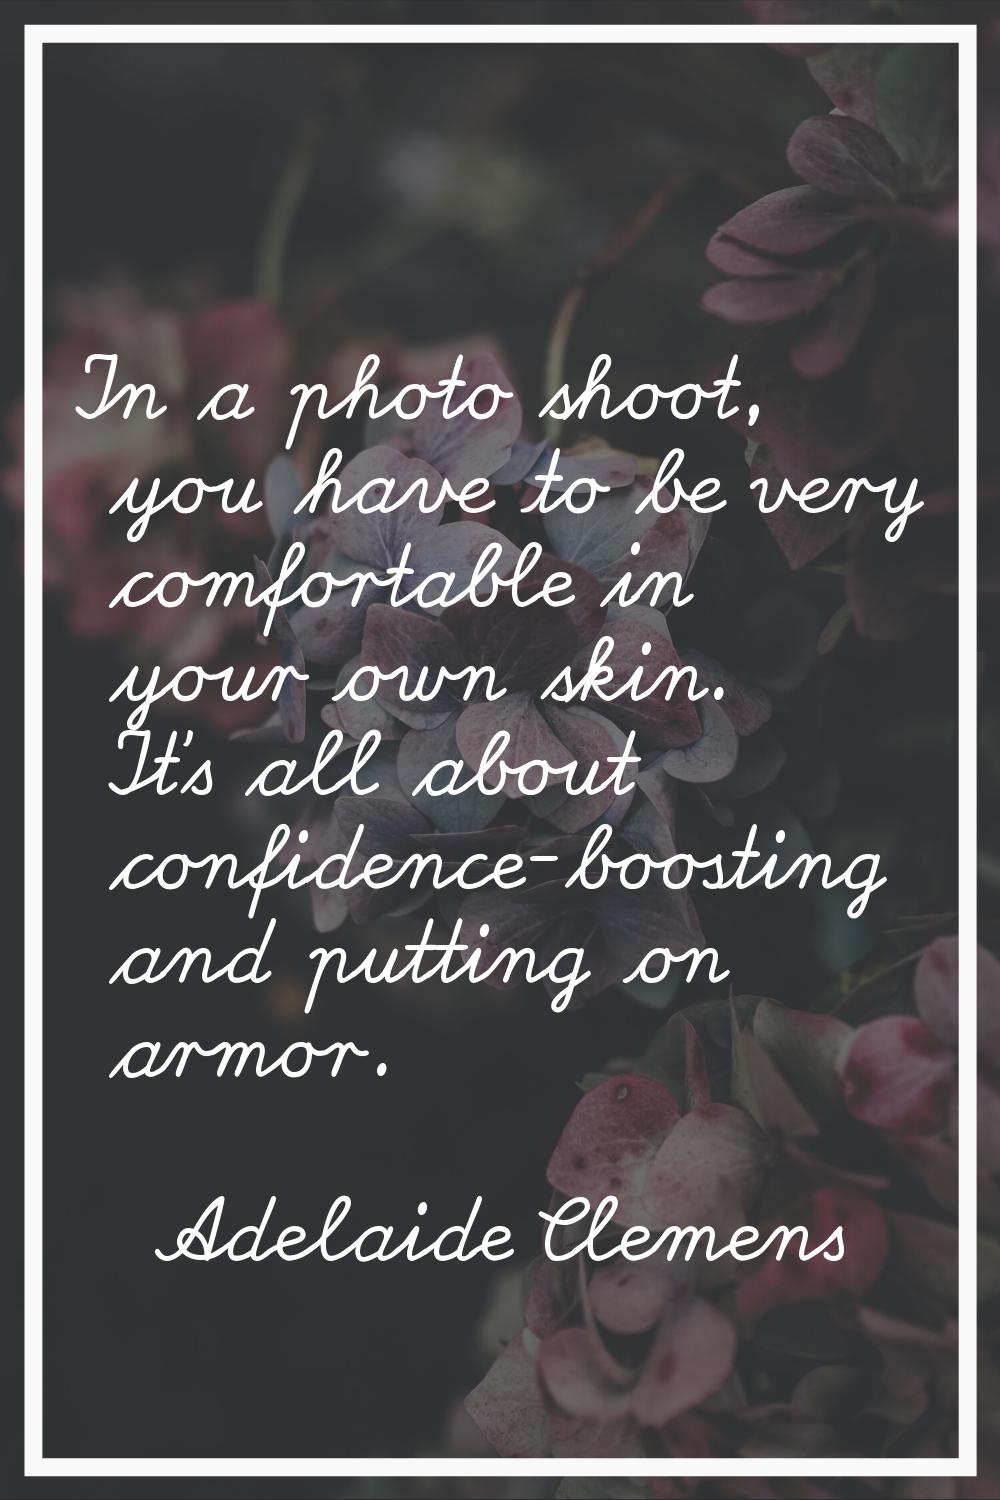 In a photo shoot, you have to be very comfortable in your own skin. It's all about confidence-boost